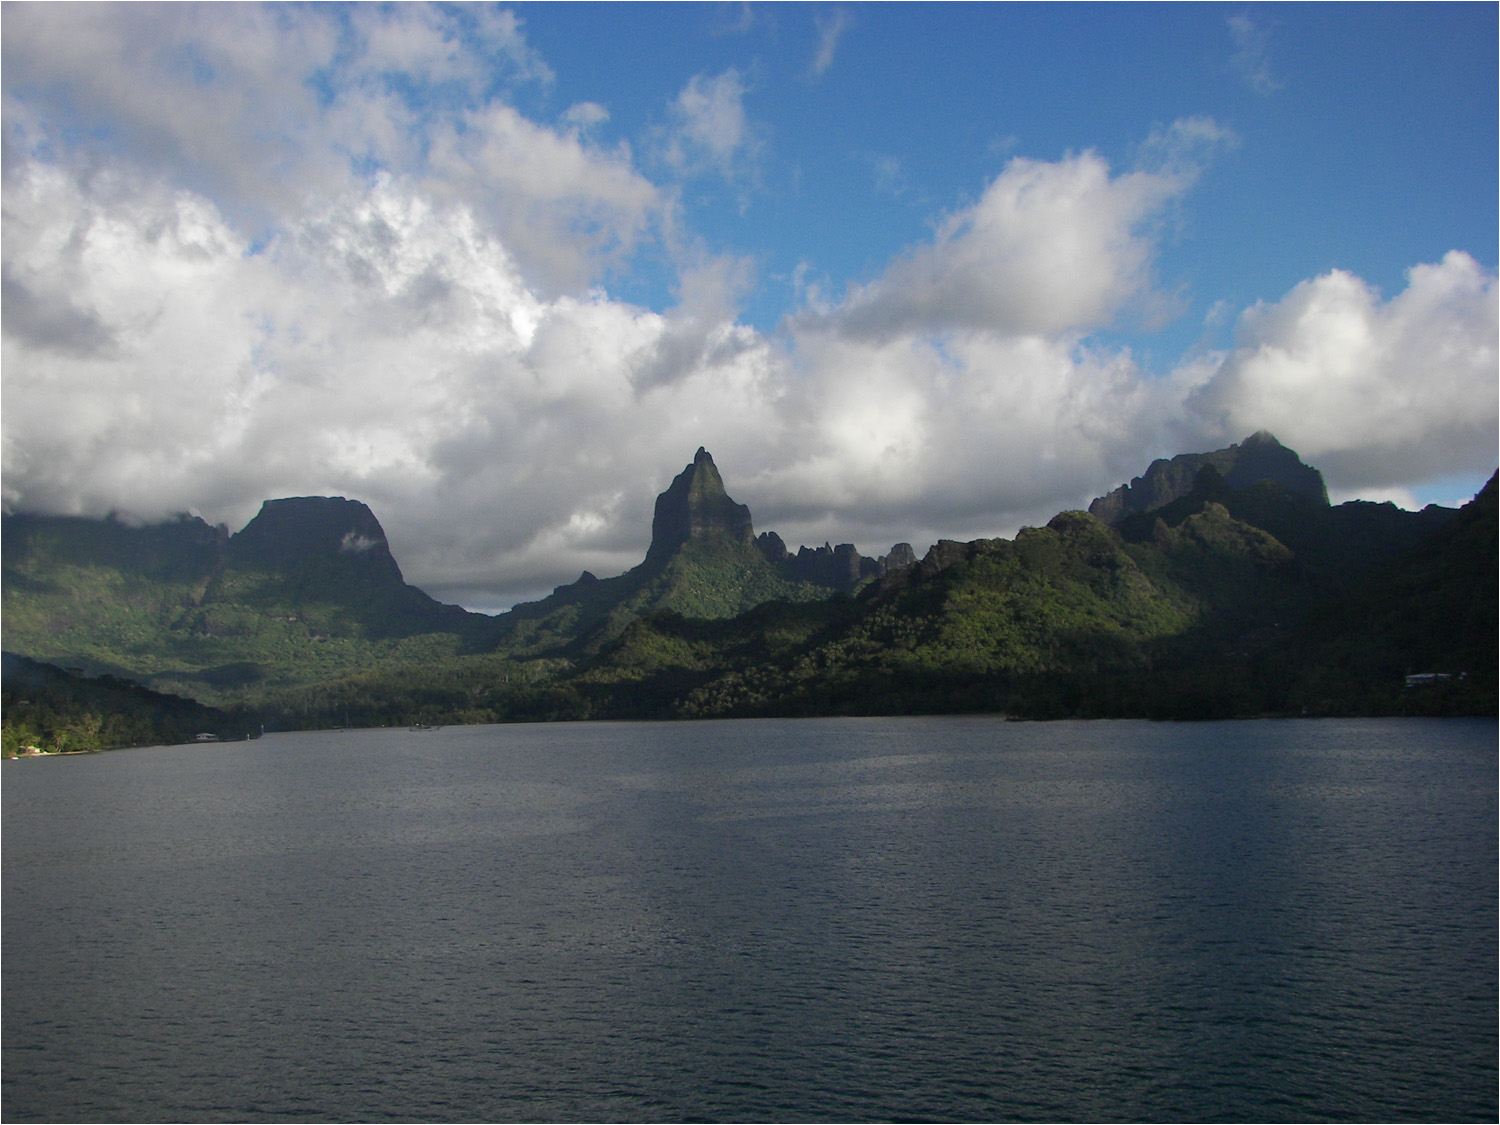 Late Saturday afternoon views of Moorea and lagoon.